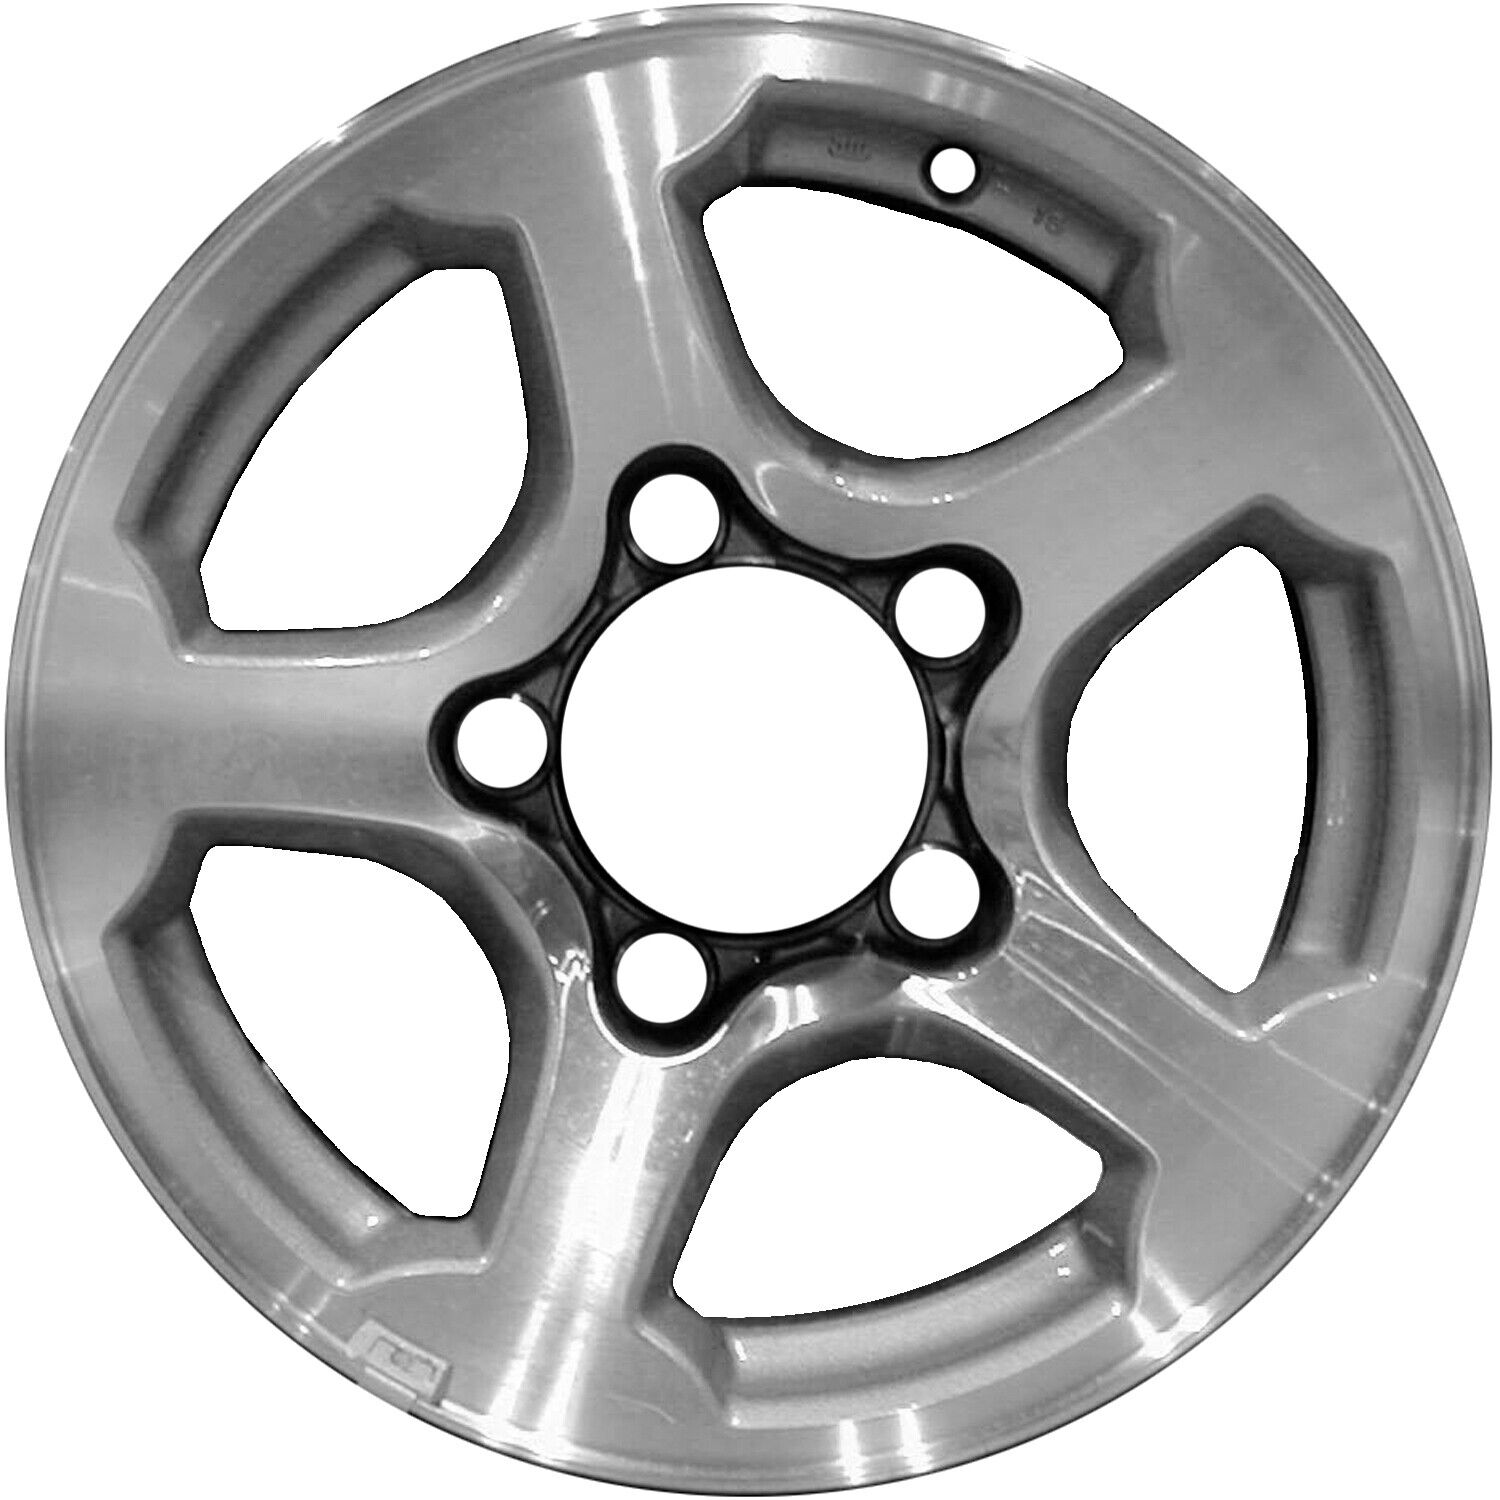 60181 Reconditioned OEM Aluminum Wheel 15x6 fits 2002-2004 Chevrolet Tracker